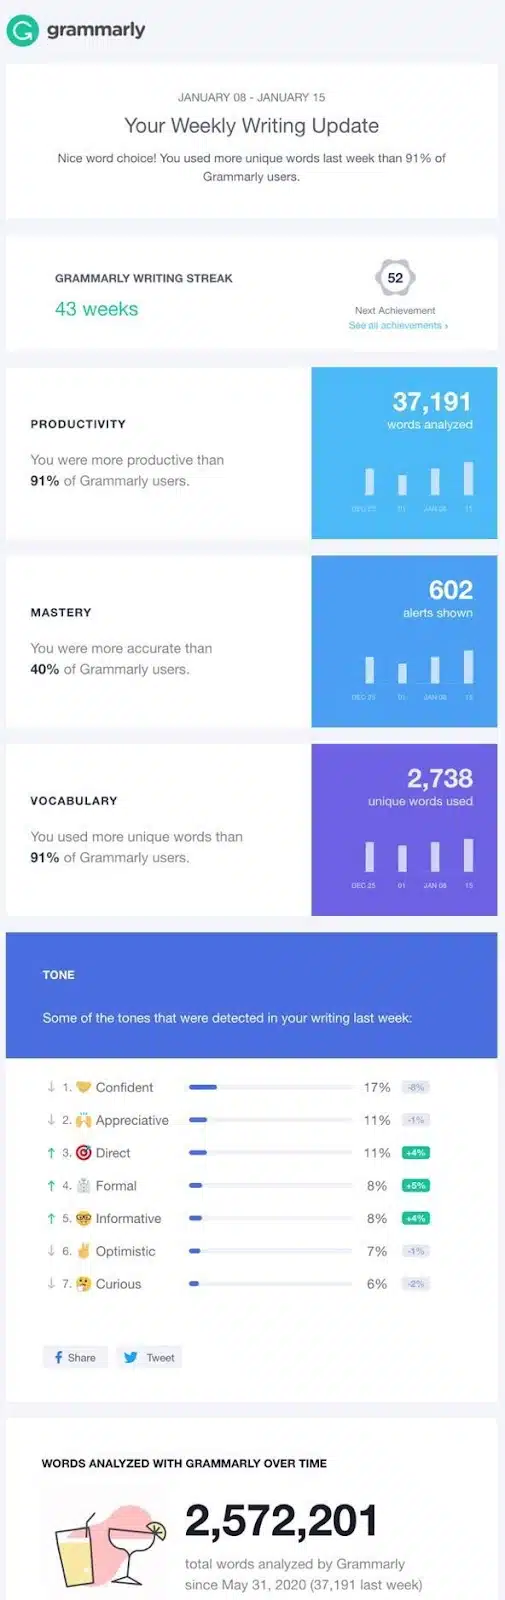 grammarly user summary email - one of 4 emails that customers will love